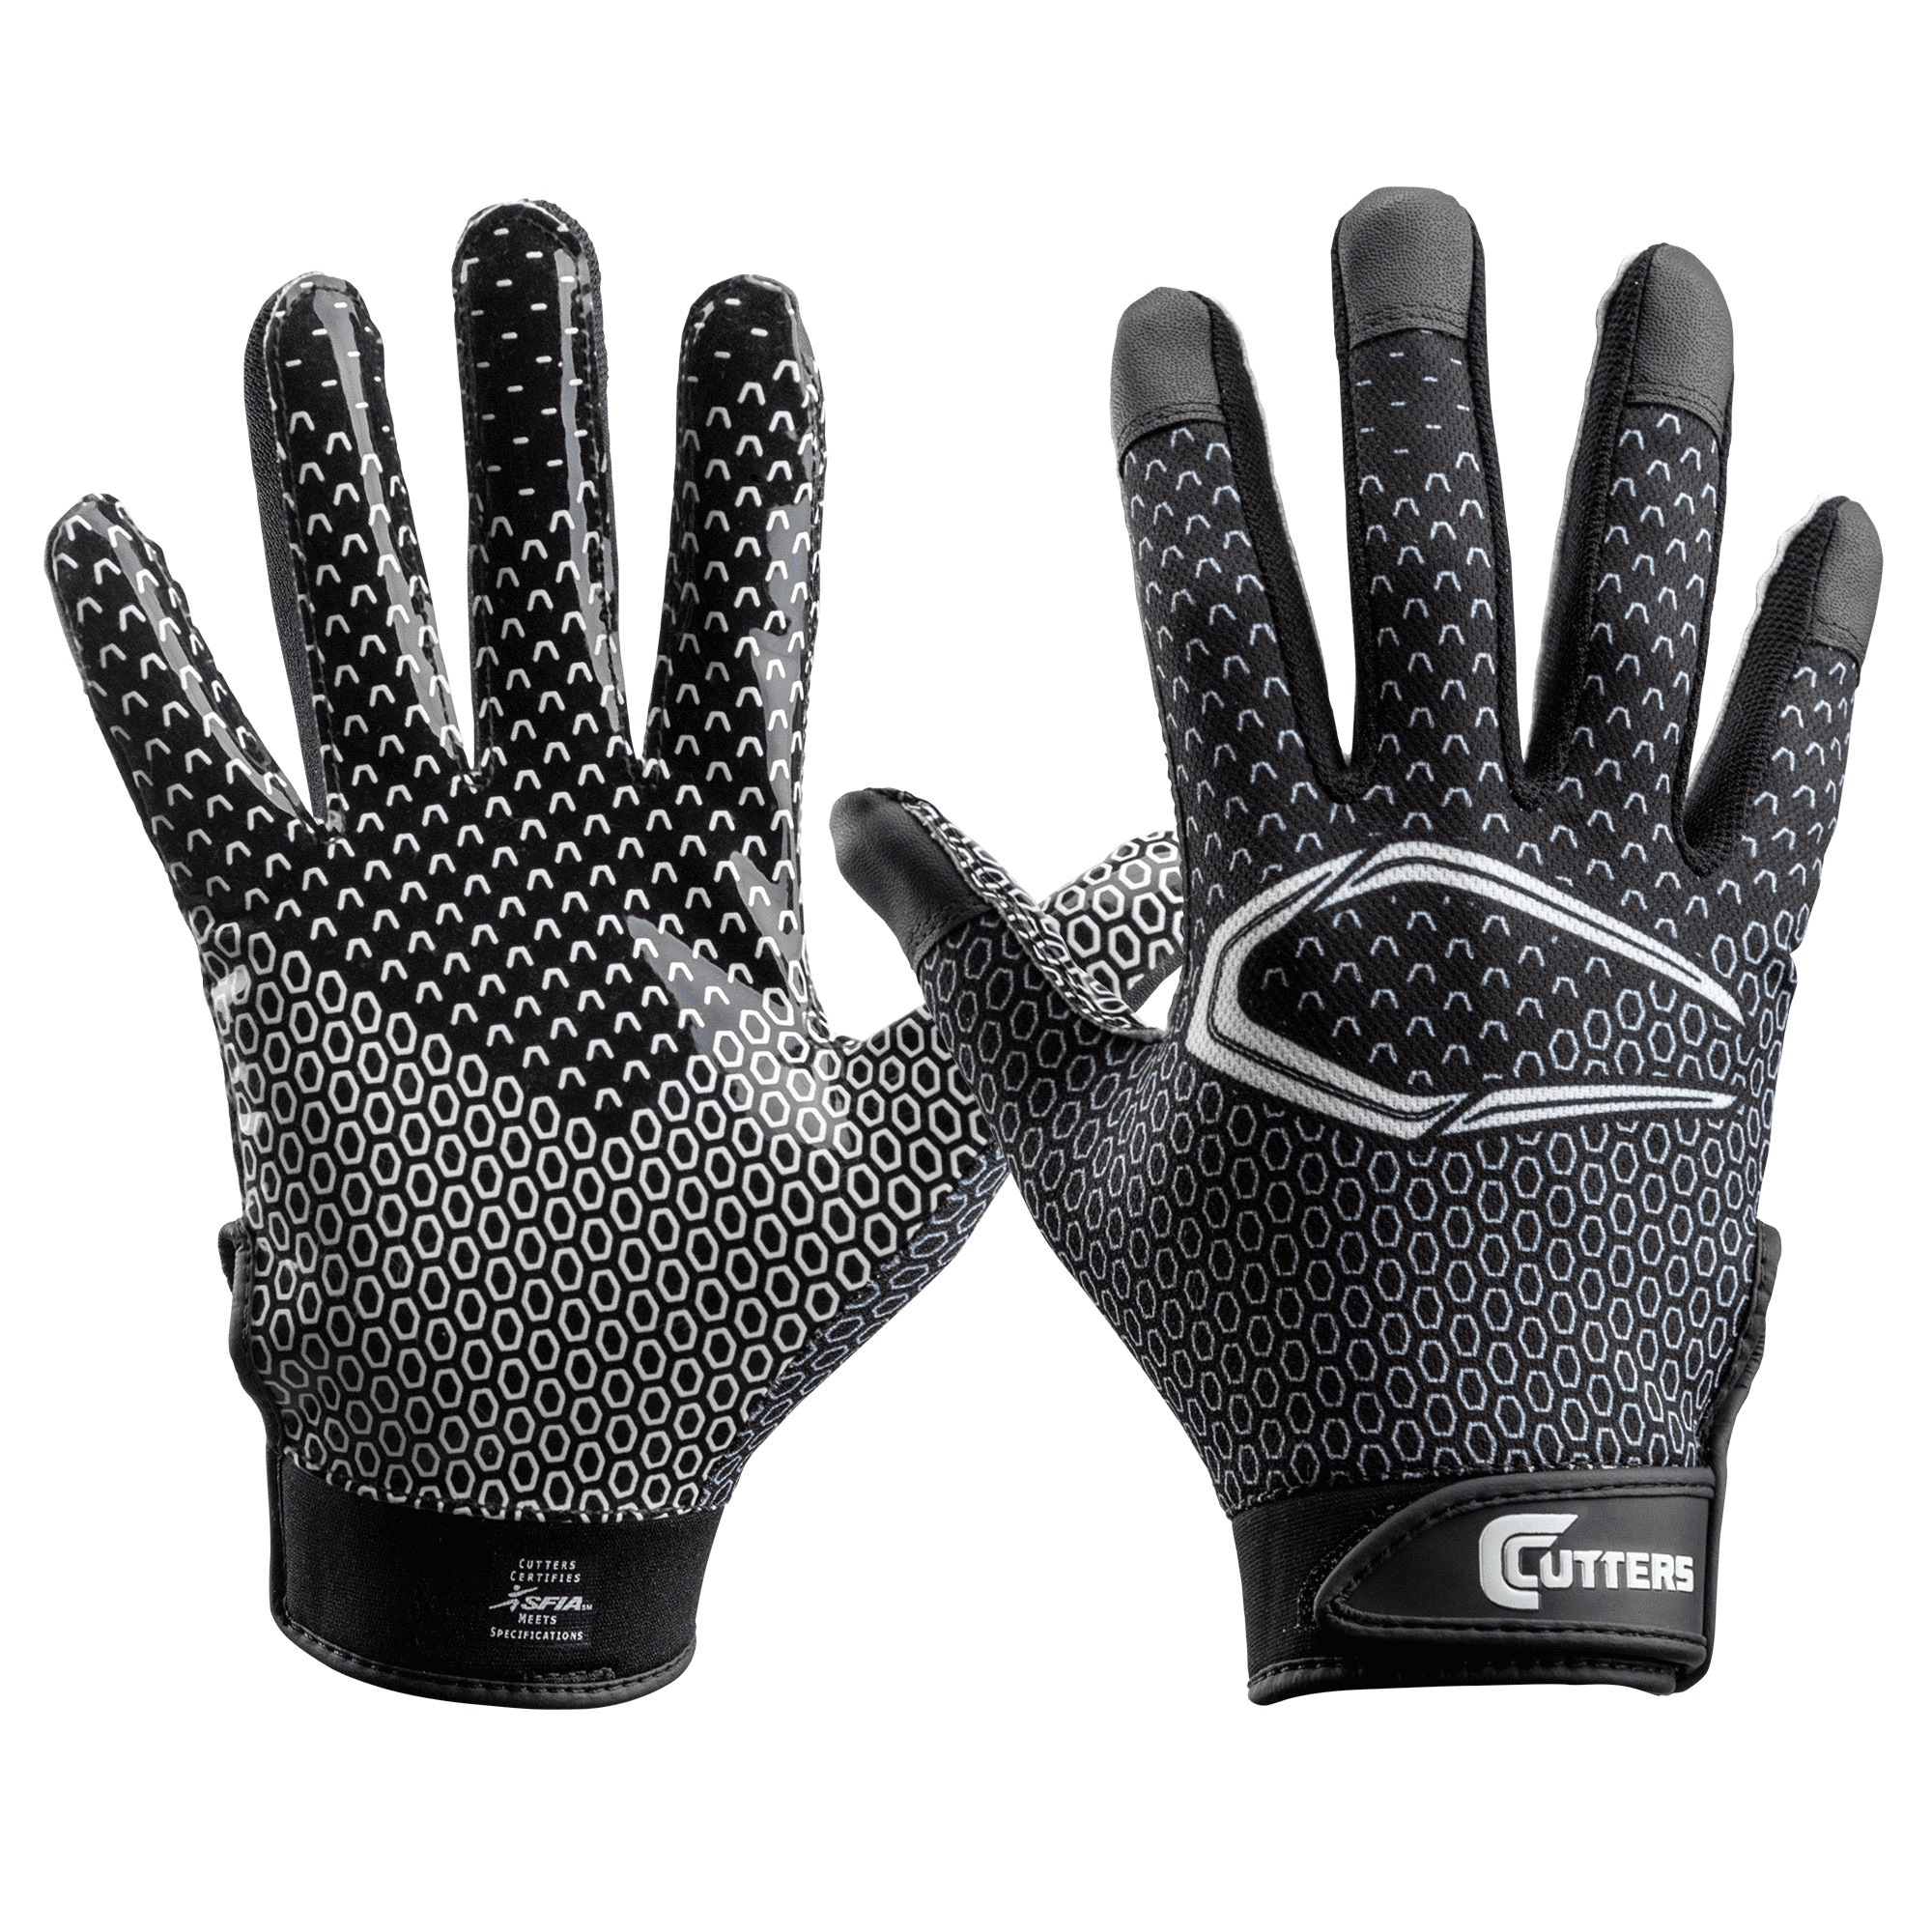 Cutters Game Day Football Receiver Glove with Silicone Grip, Youth Size Small/Medium, Black